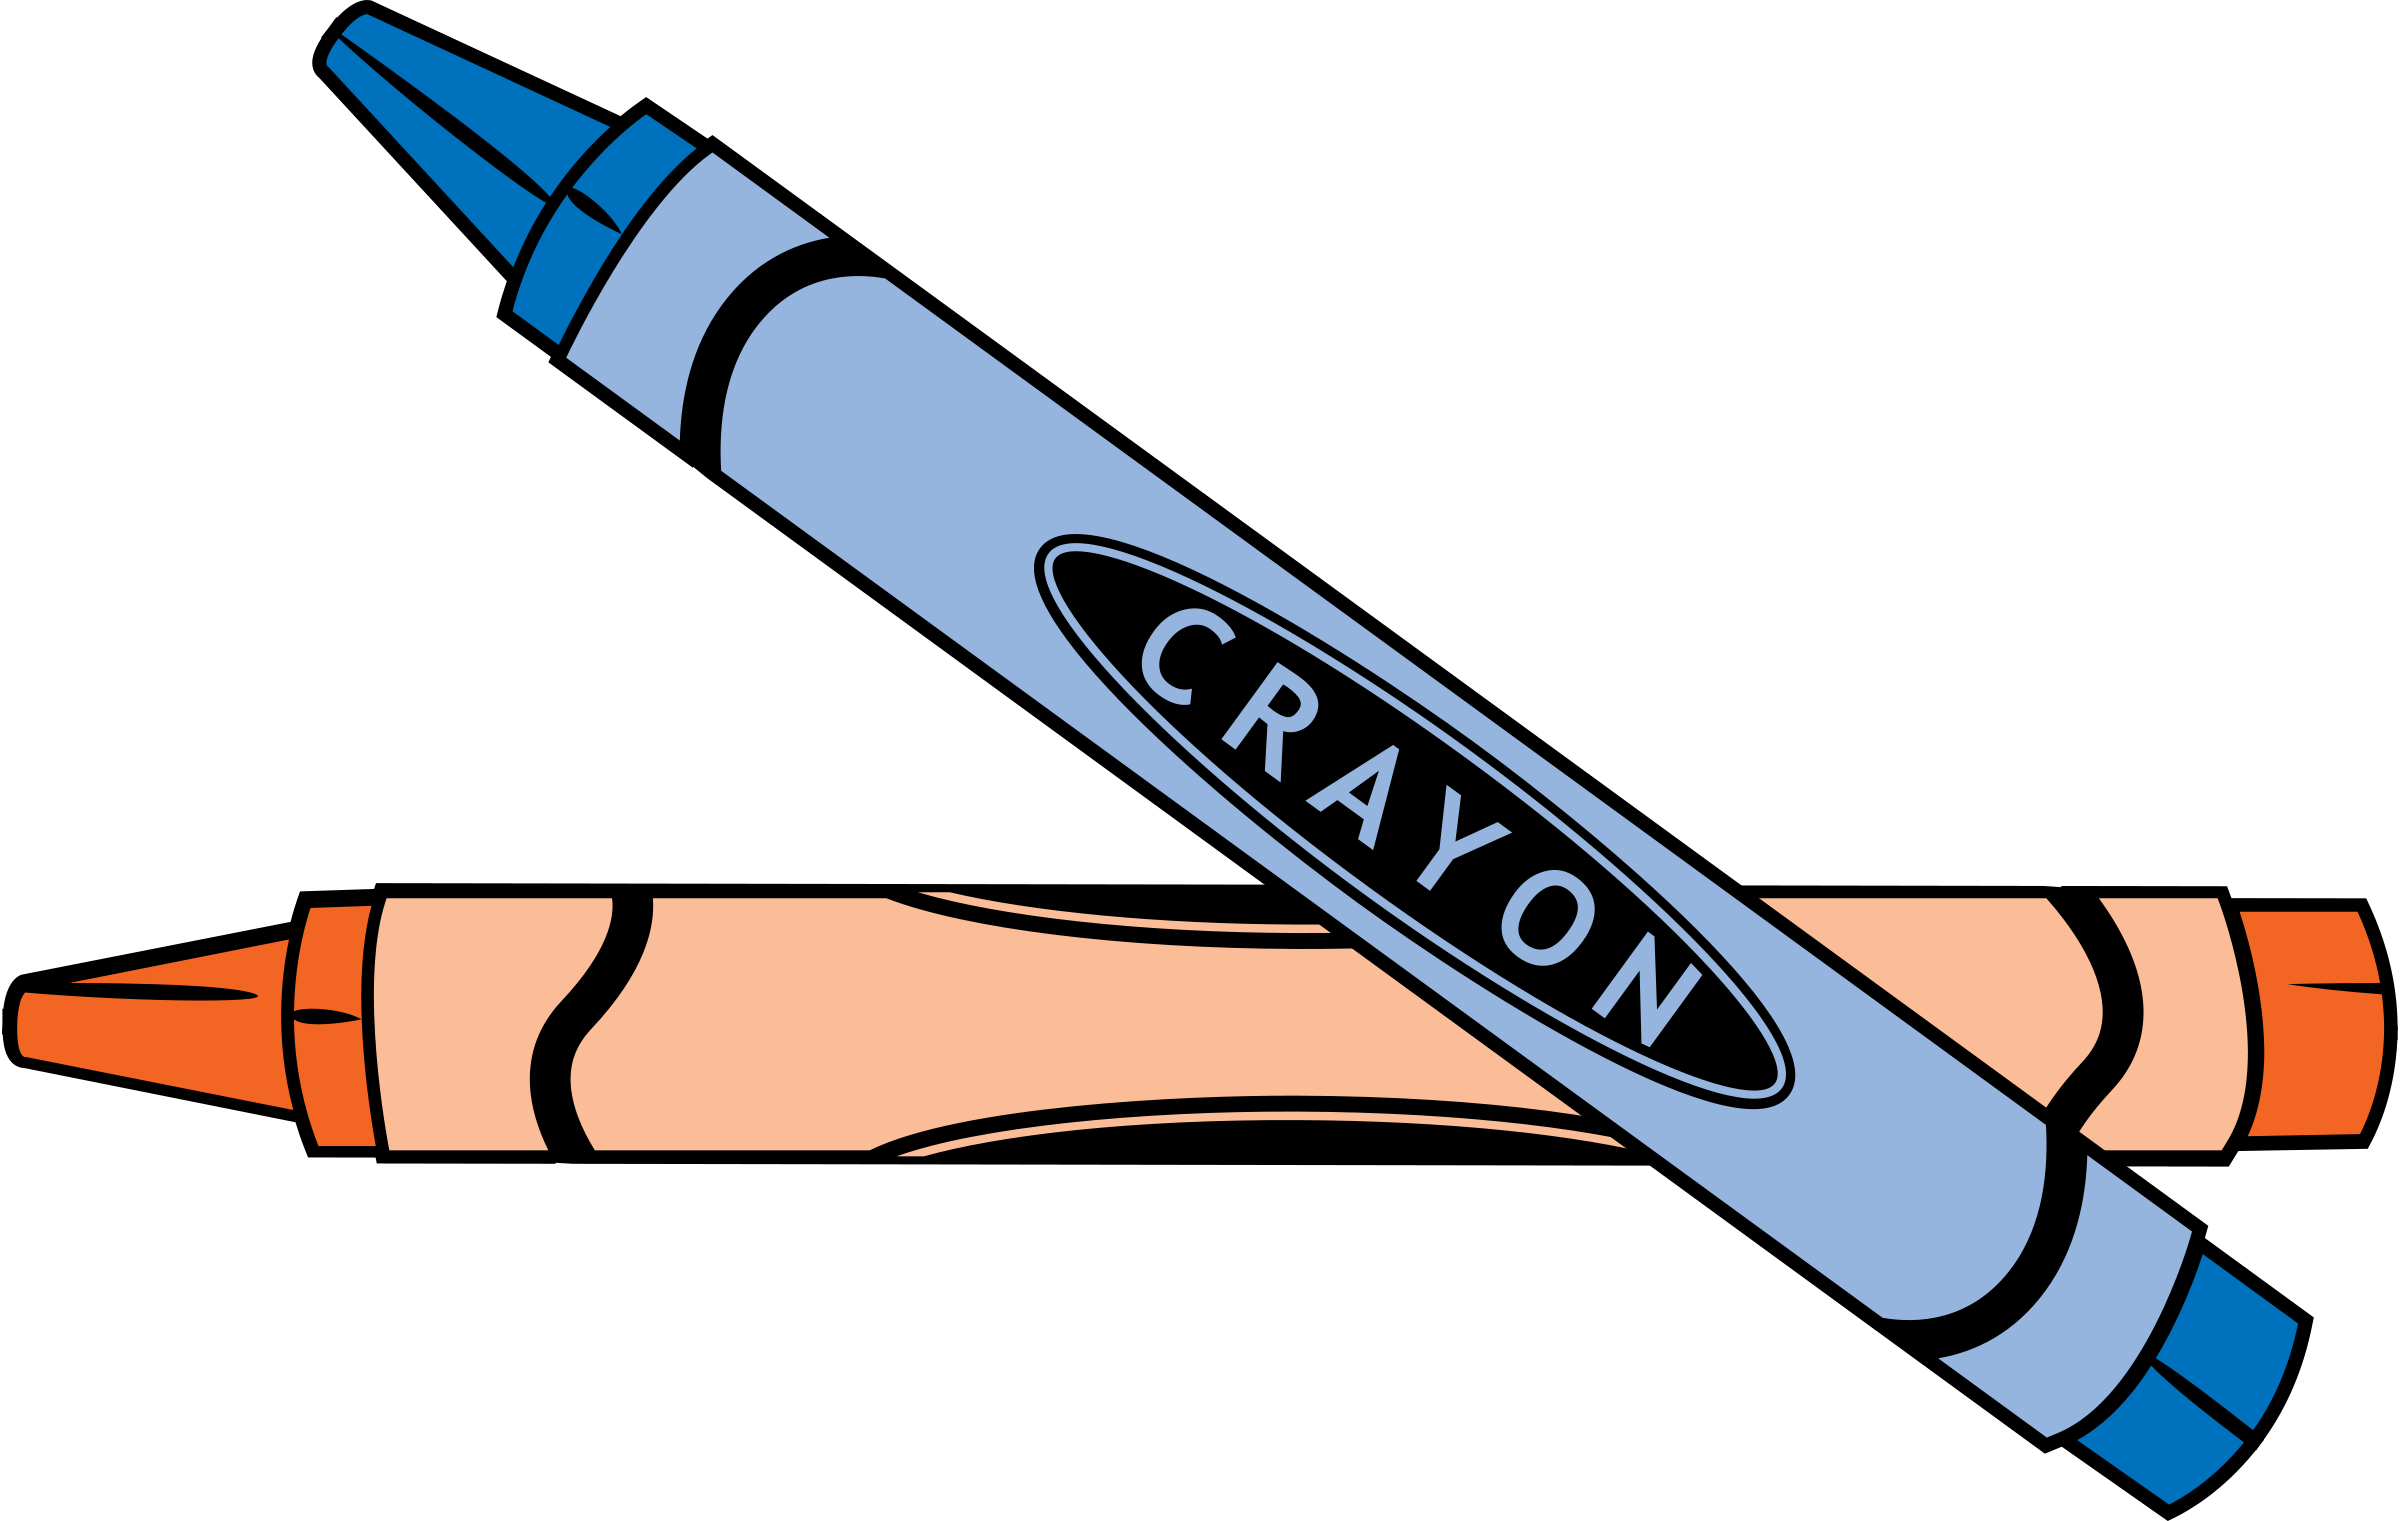 Crayons clipart shape. Collection of free softball